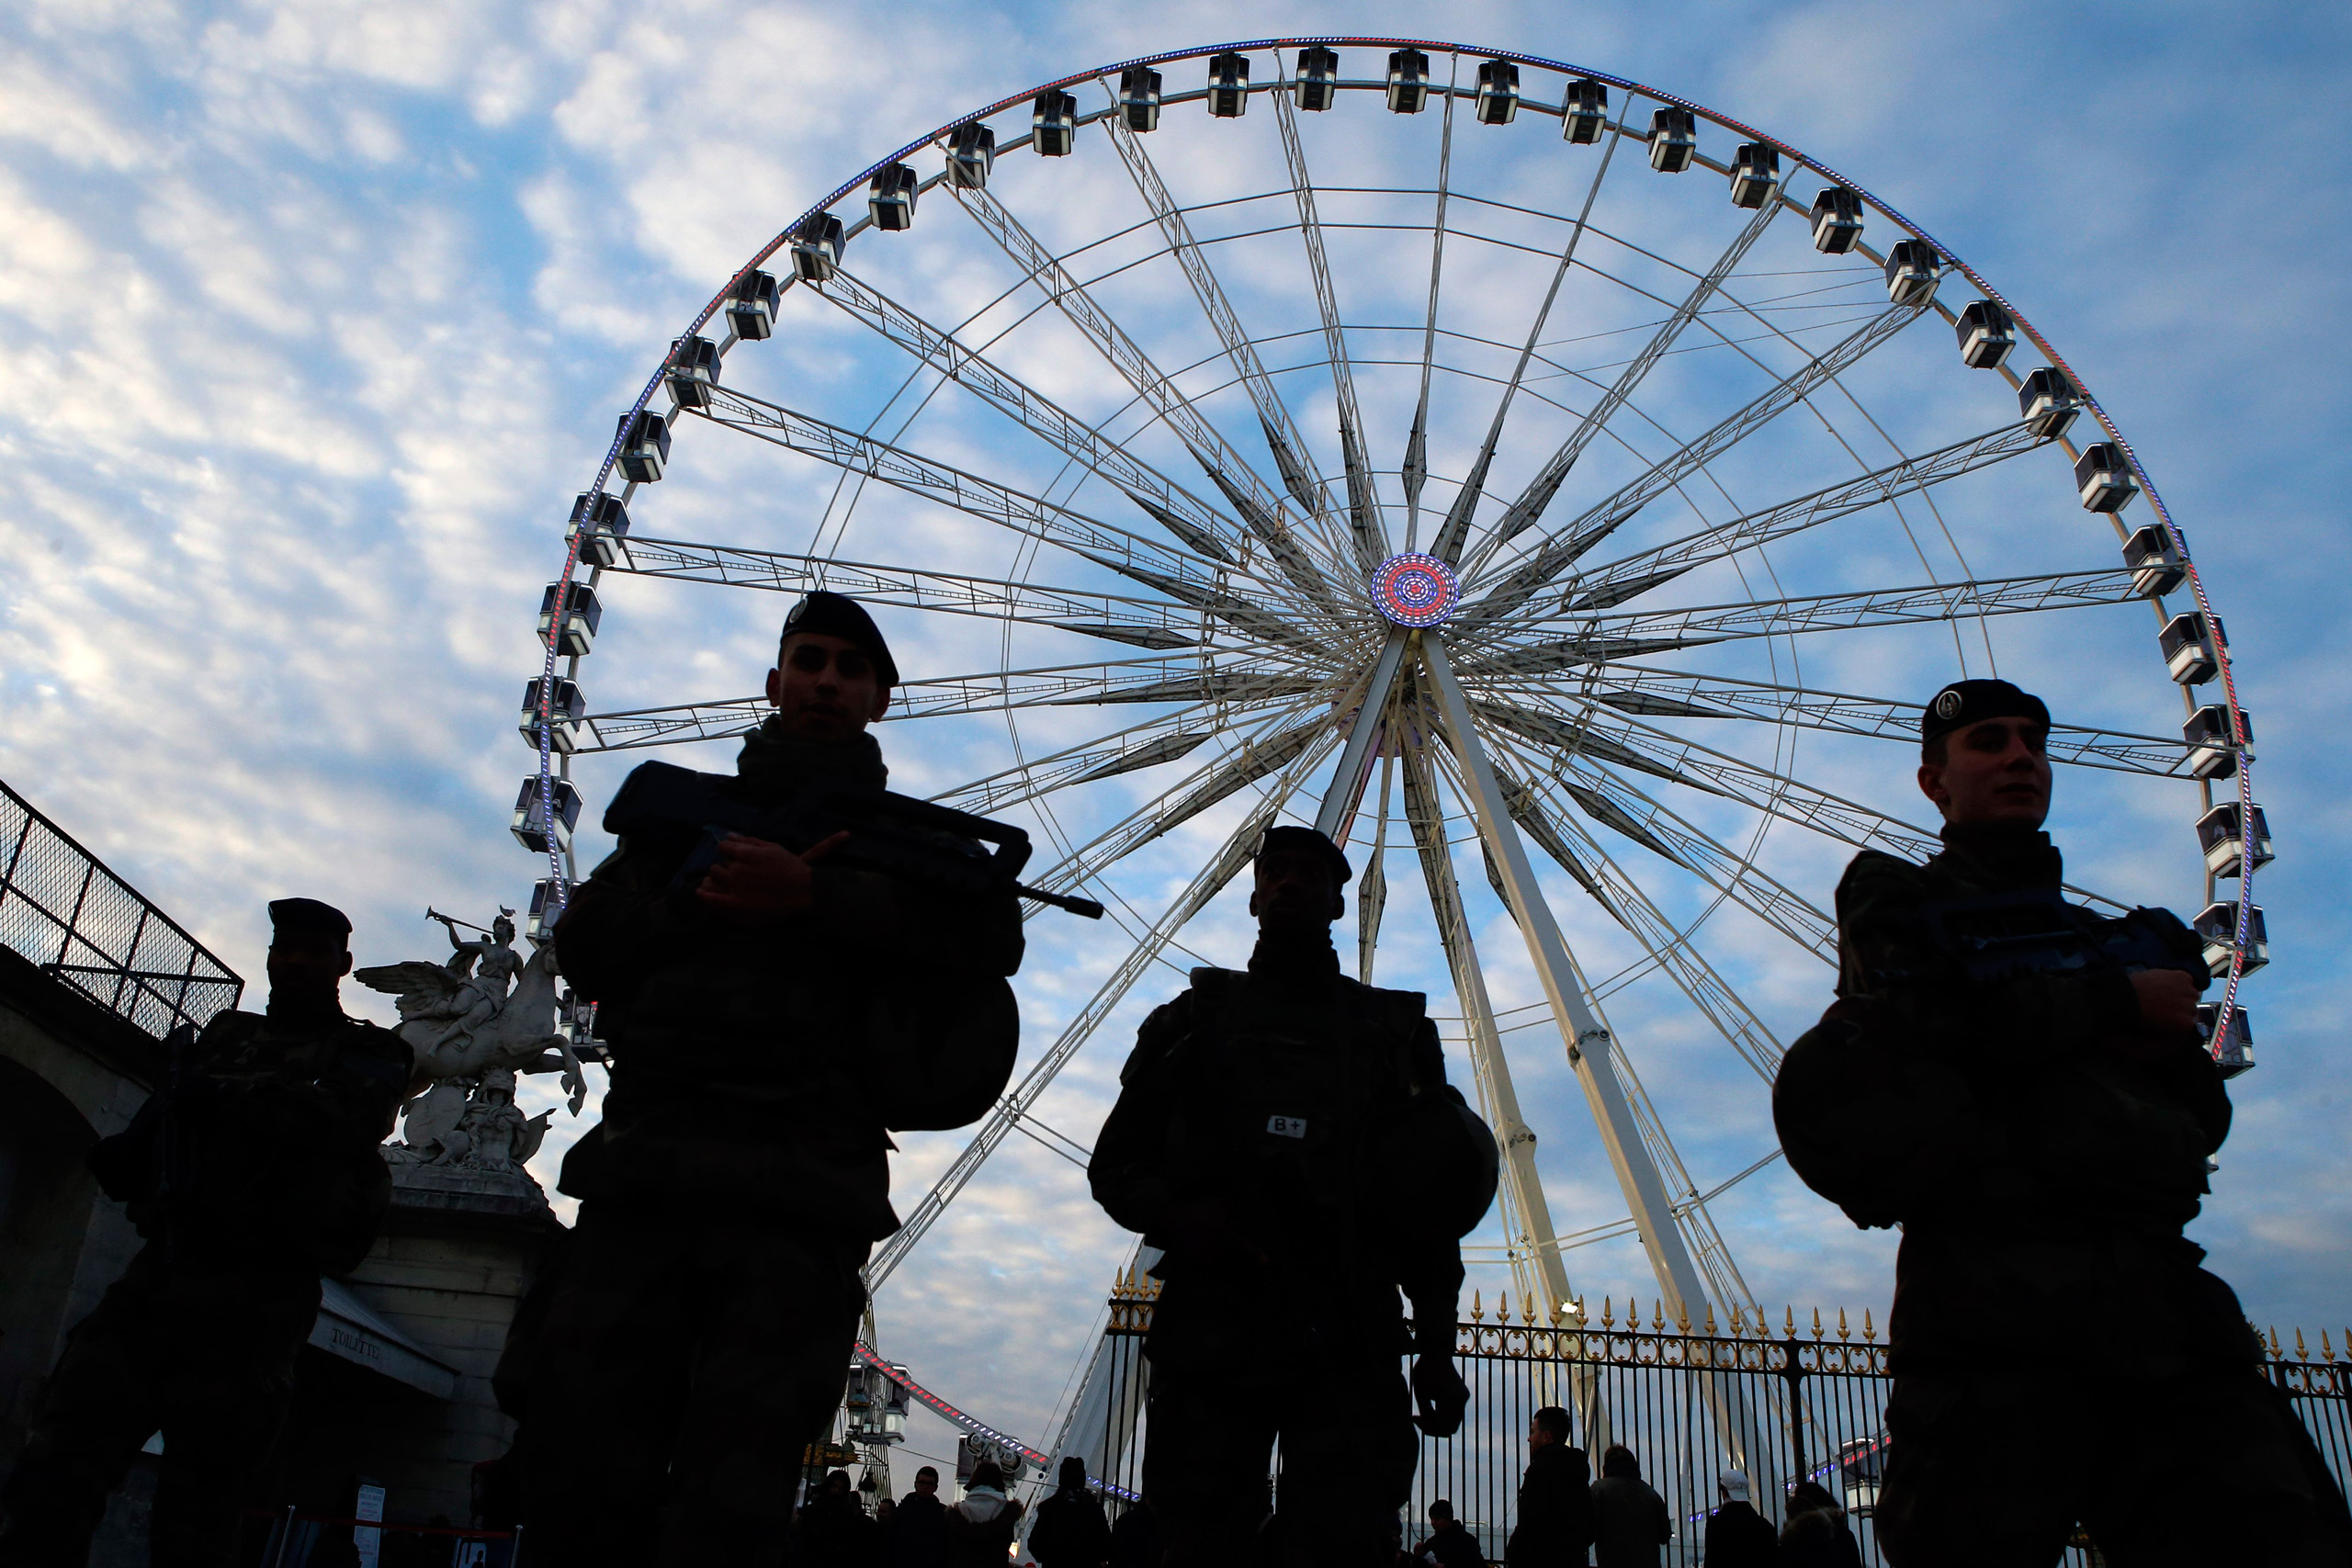 French soldiers patrol in front of the Paris ferris Big Wheel next to the Champs Elysees, in Paris, France, Sunday, Nov. 22, 2015 one week after the Paris attacks. French Defense ministry announced that there are currently 10,000 soldiers deployed in France as part of security measures put in place in the wake of the attacks, including 6,500 in the Paris region.(AP Photo/Francois Mori)